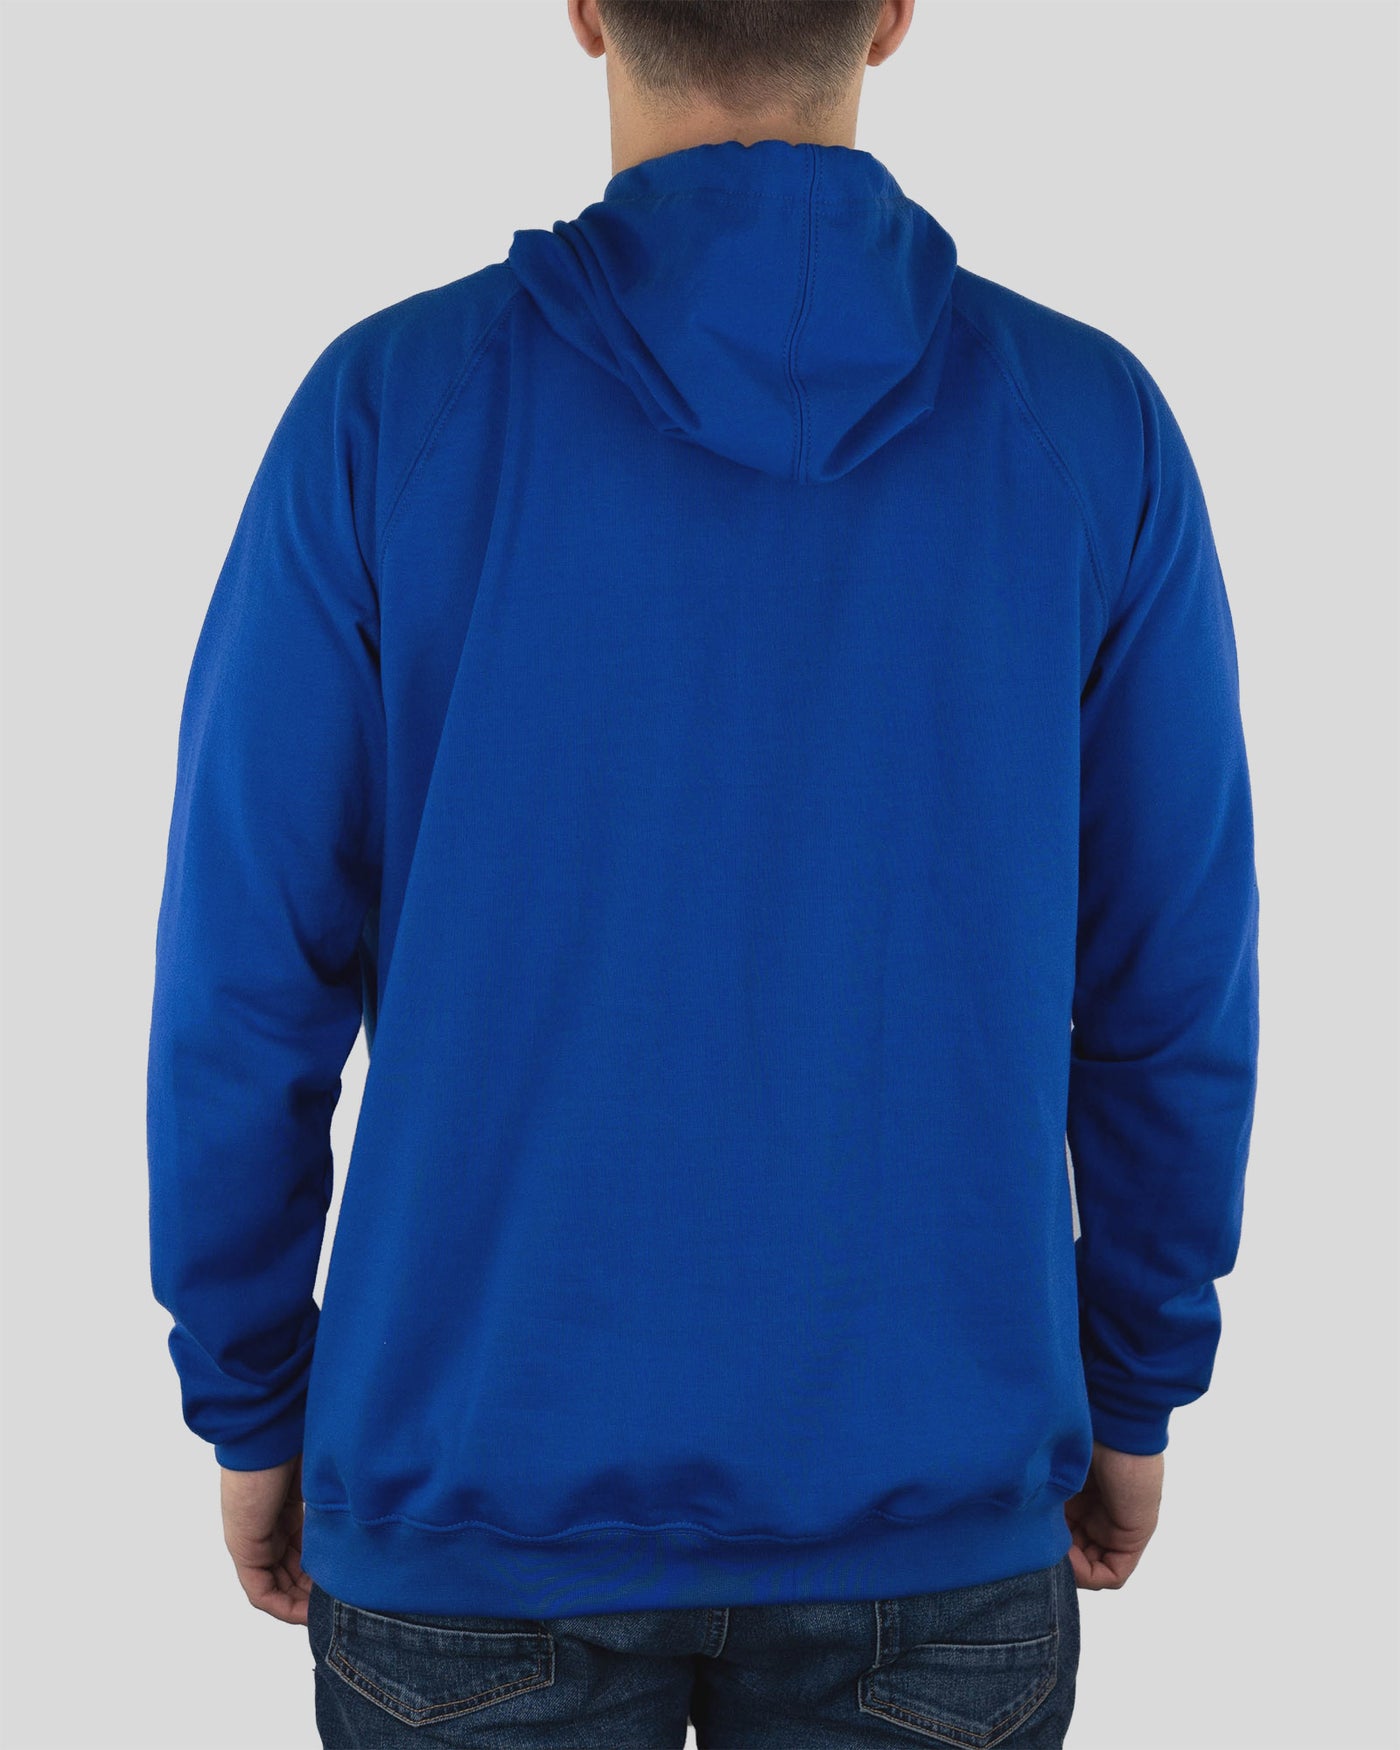 Outfield Fence Hoodie - Texas Rangers